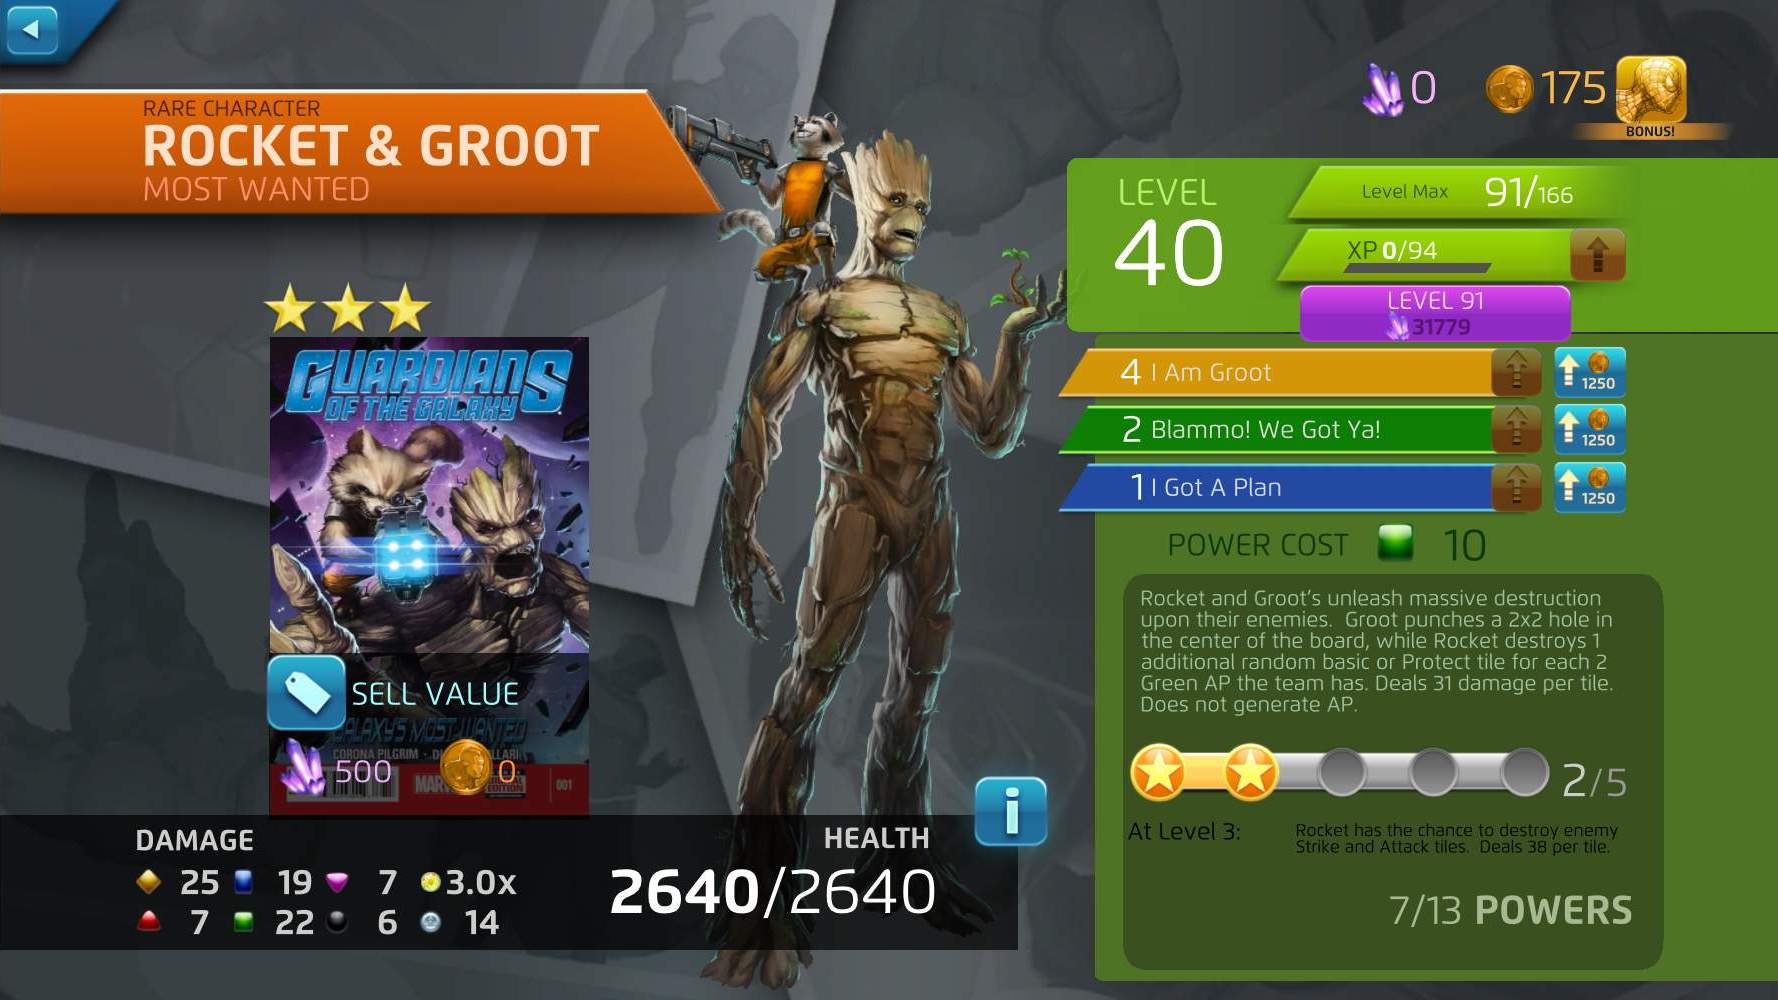 Rocket Raccoon And Groot Are One In Marvel Puzzle Quest